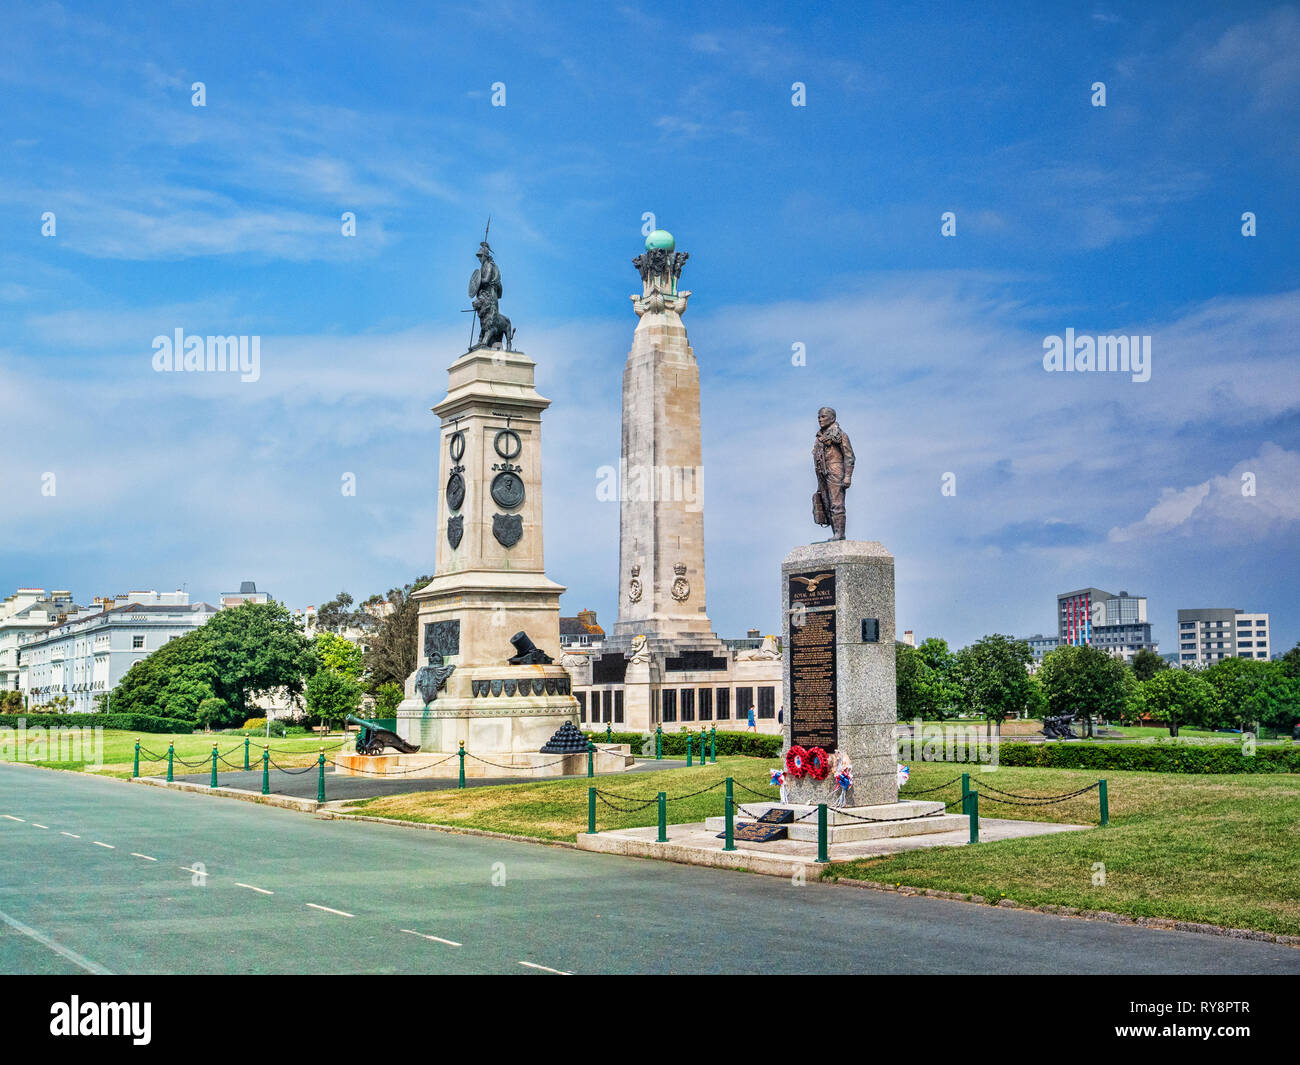 8 June 2018: Plymouth, Devon, UK - Monuments or war memorials on Plymouth Hoe - left to right, the Armada Monument, the Royal Navy Monument and the Ro Stock Photo